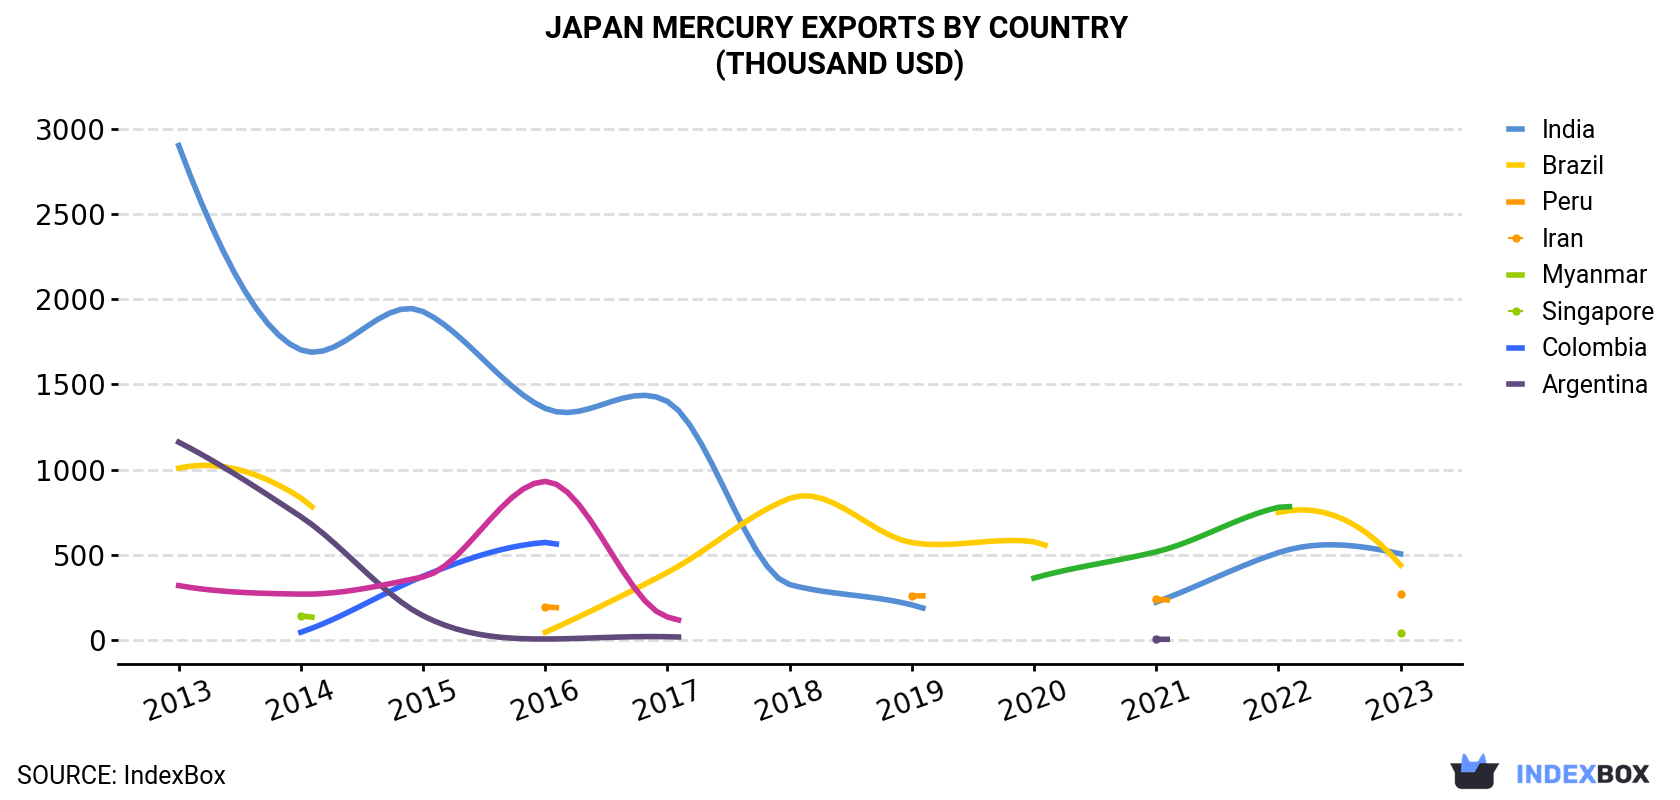 Japan Mercury Exports By Country (Thousand USD)